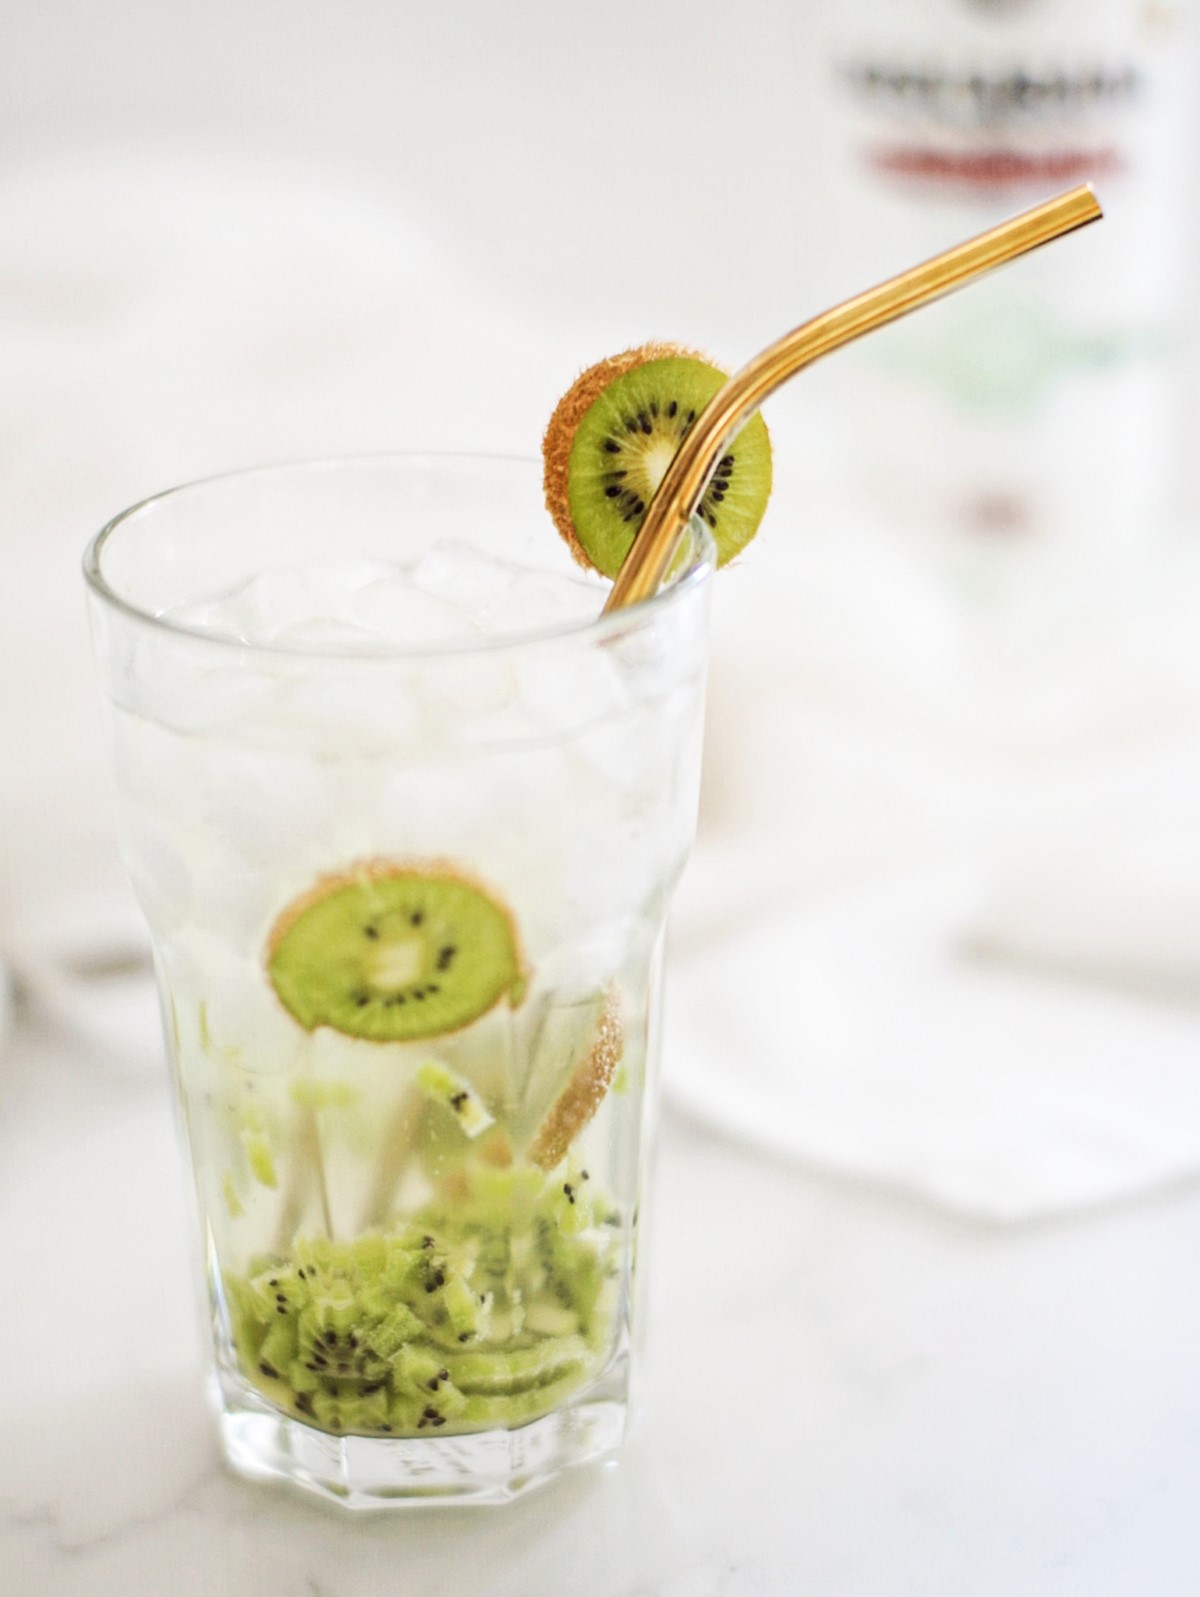 Refreshing Kiwi Cocktail - Title of the Recipe